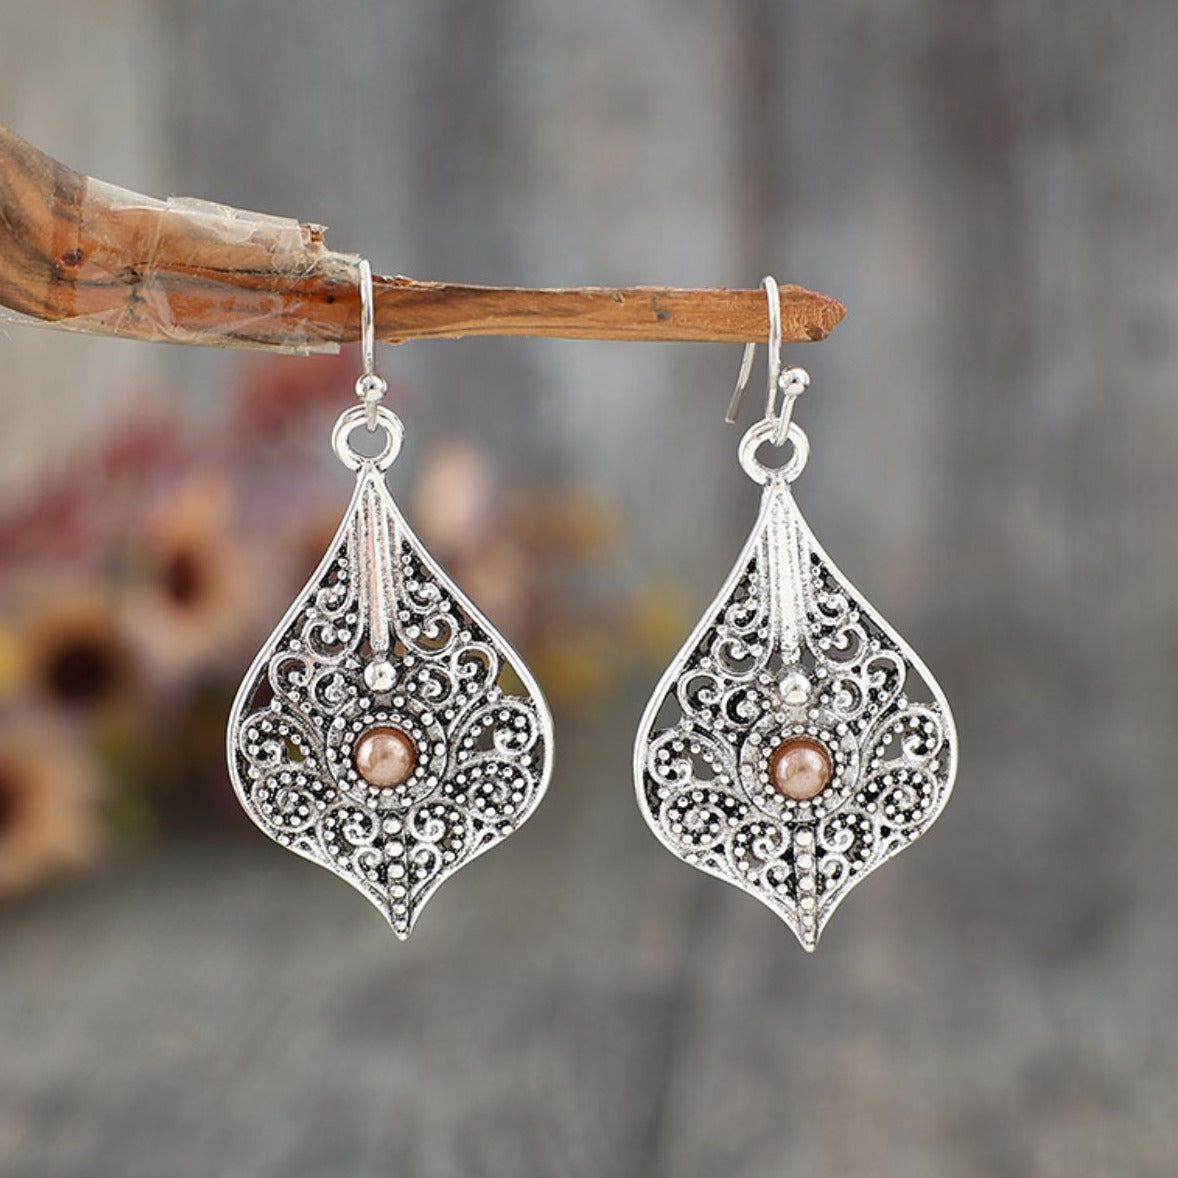 Vintage-style teardrop earrings with intricate silver filigree and a central bead